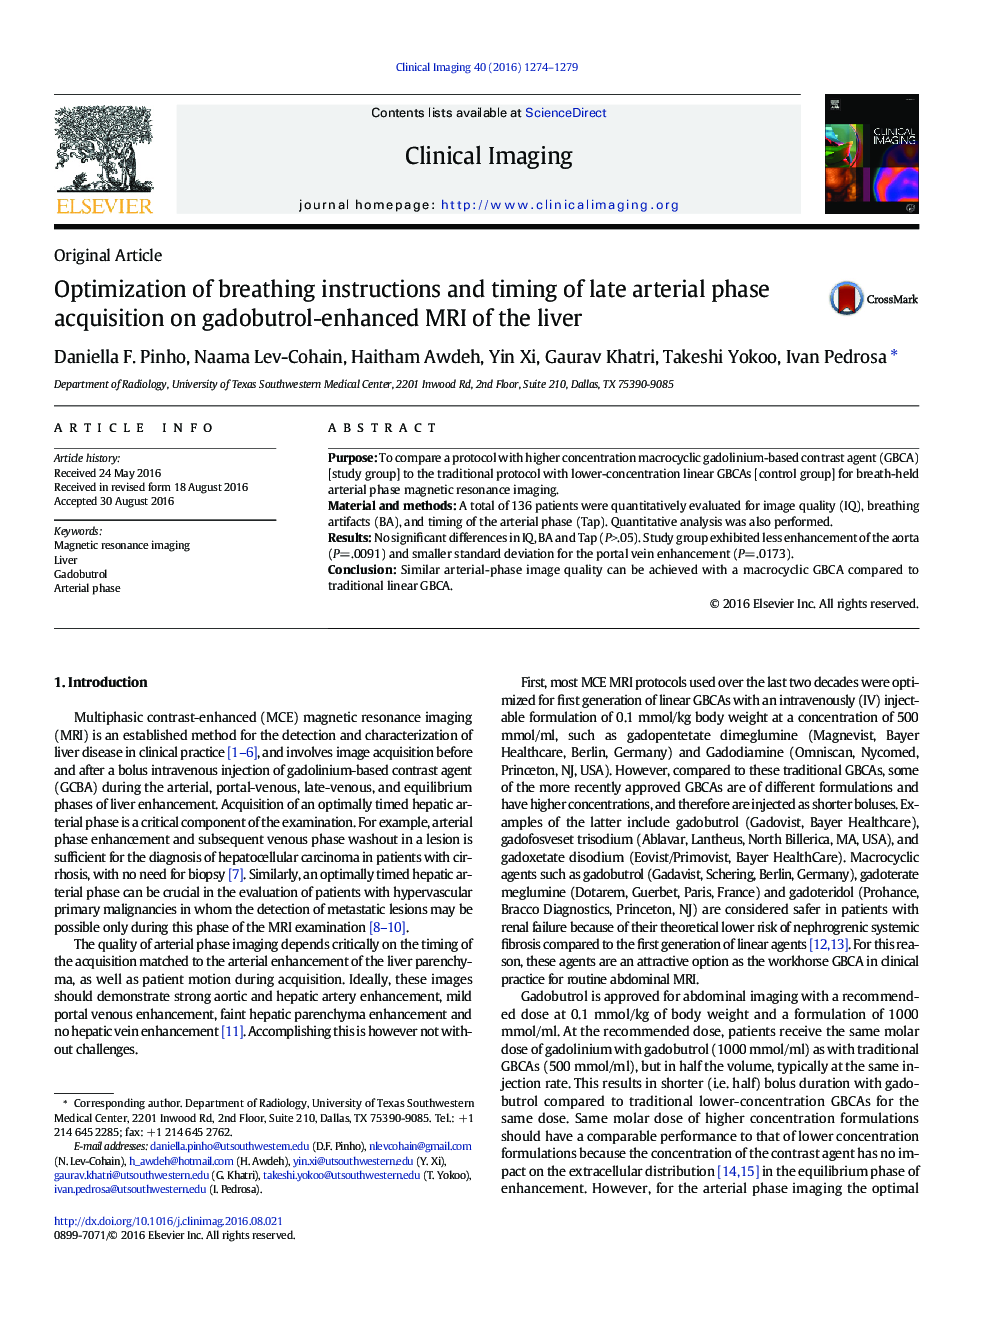 Optimization of breathing instructions and timing of late arterial phase acquisition on gadobutrol-enhanced MRI of the liver